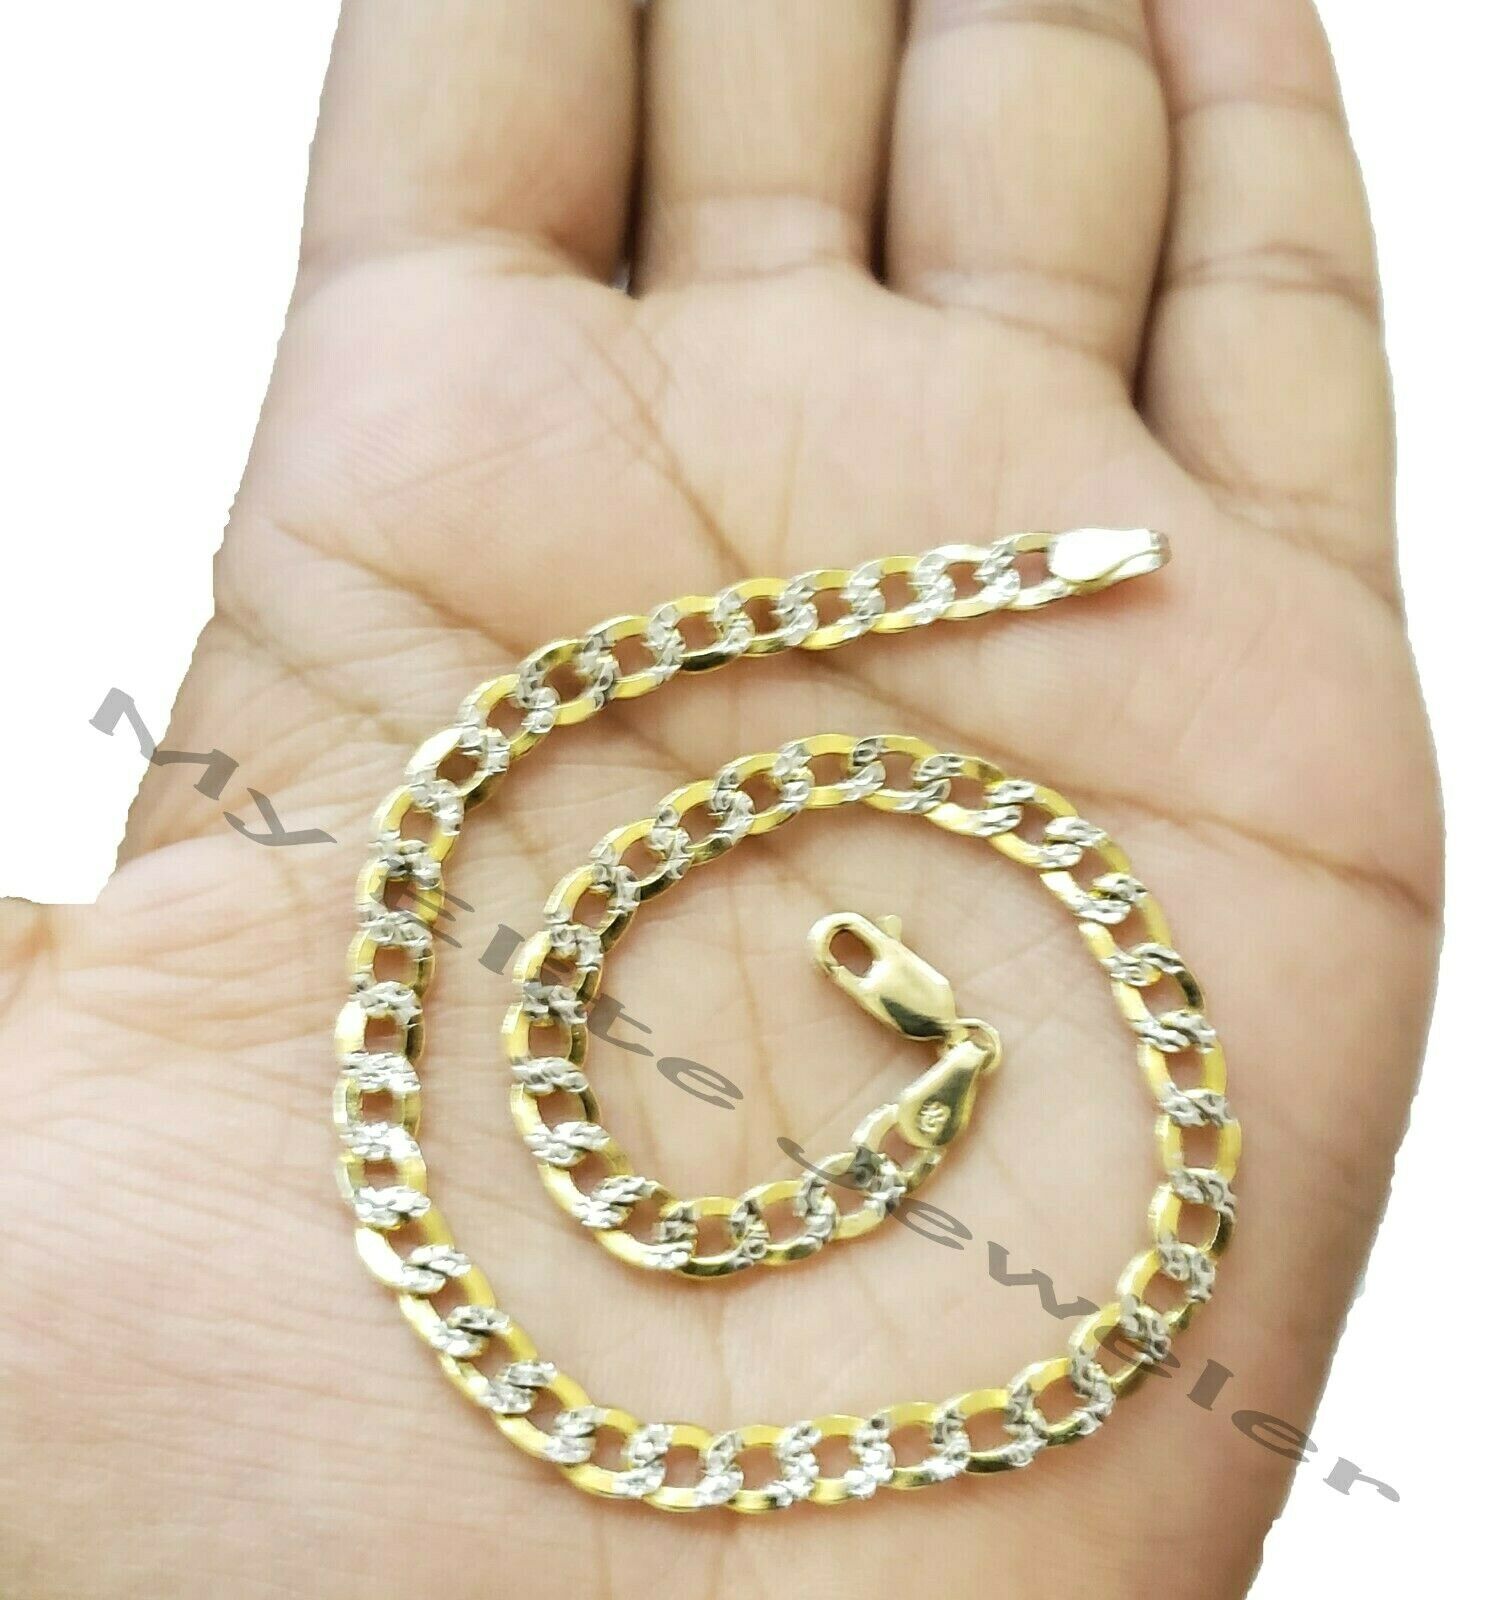 10k Gold Bracelet for Mens Ladies REAL Yellow Gold Cuban Link Diamond Cuts 8Inch